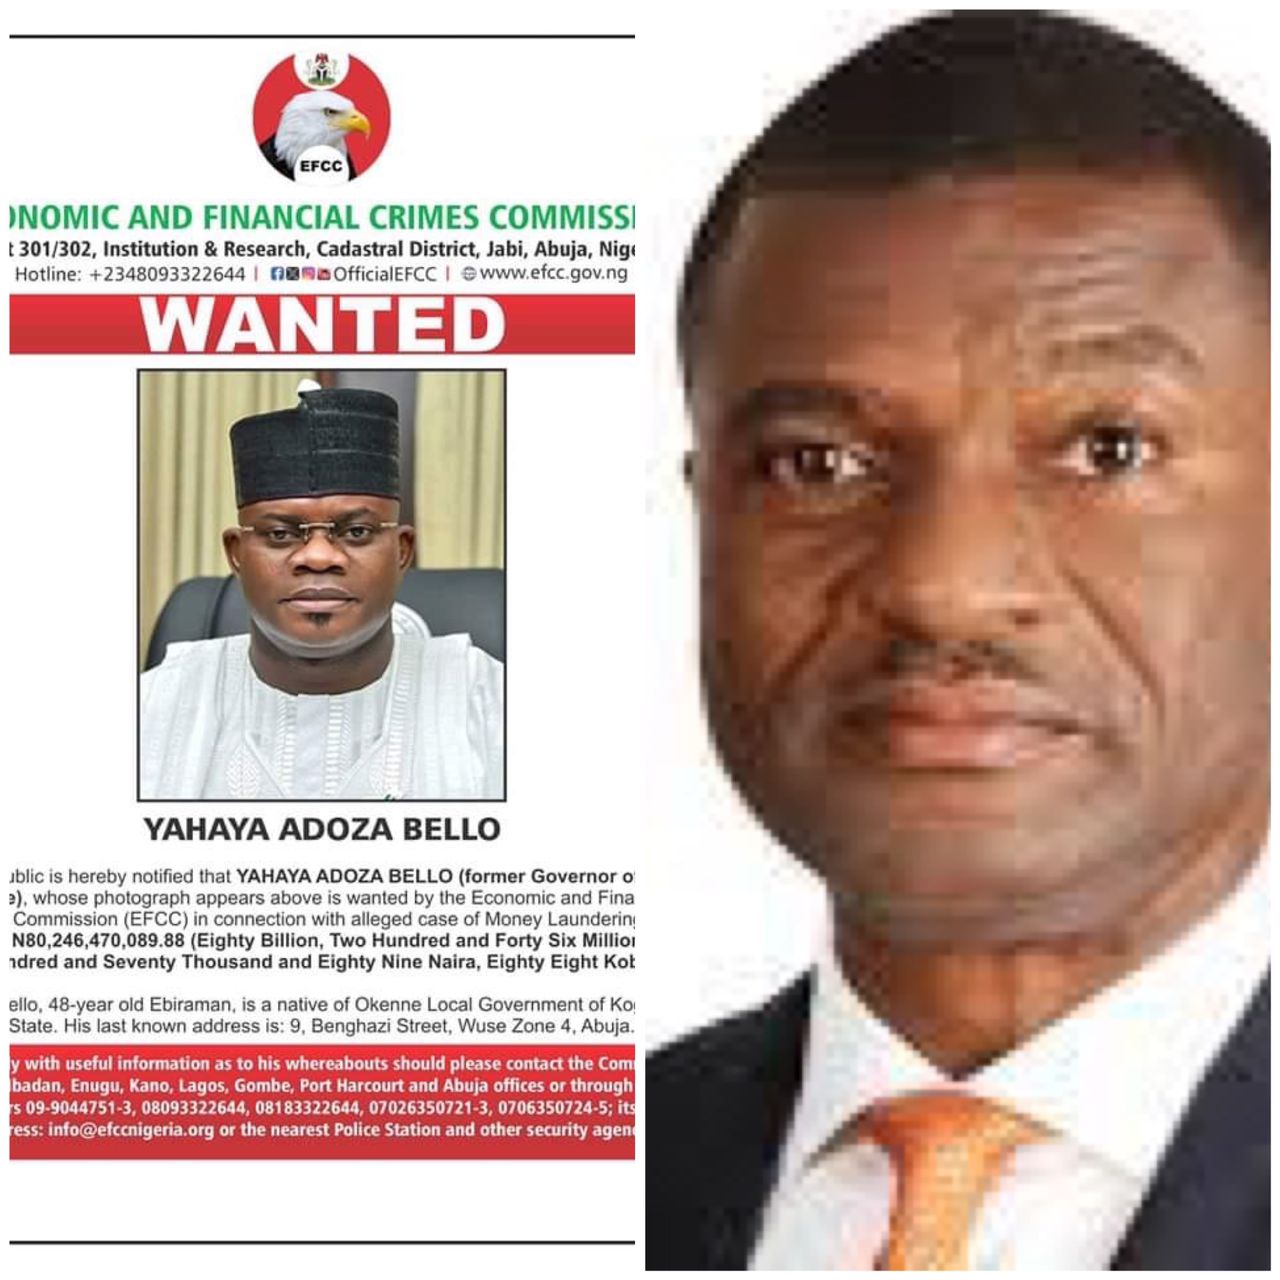 He was reckless in his speech and his conduct. Kogi people were his slaves - Former Minister Frank Nweke Jnr writes as EFCC declares Yahaya Bello wanted